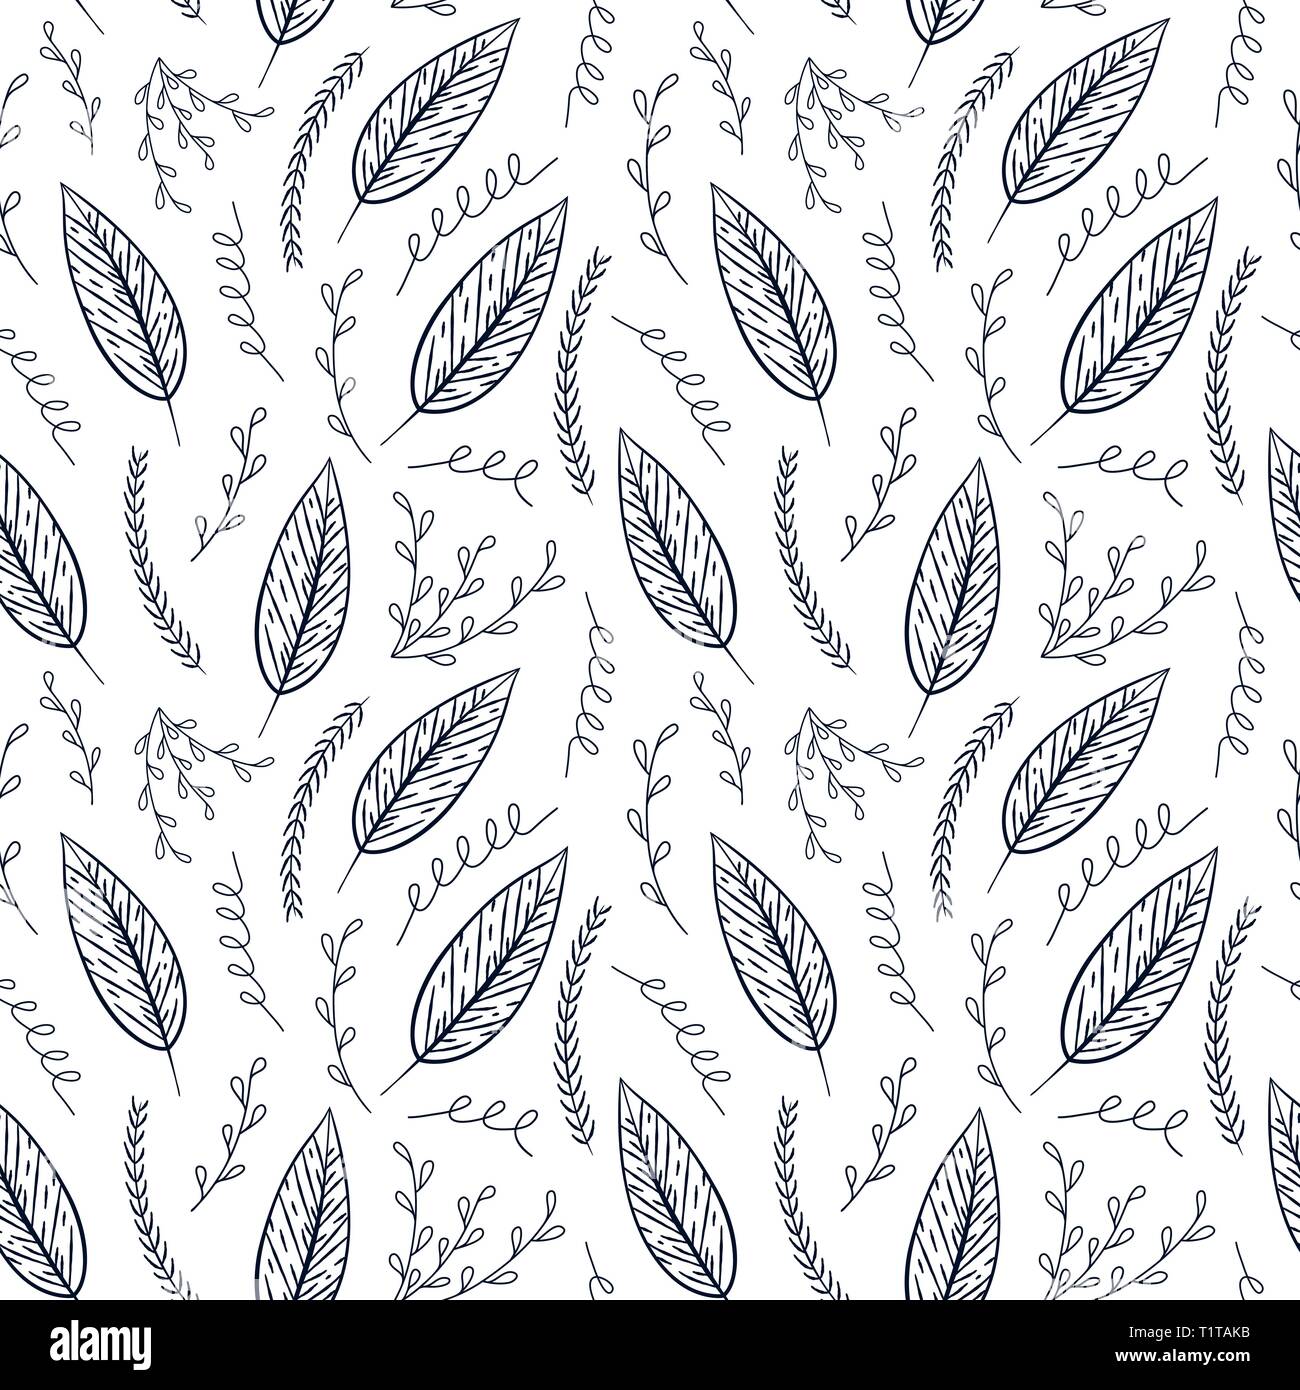 https://c8.alamy.com/comp/T1TAKB/vector-seamless-contour-floral-pattern-hand-drawn-monochrome-floral-texture-decorative-leaves-coloring-book-T1TAKB.jpg